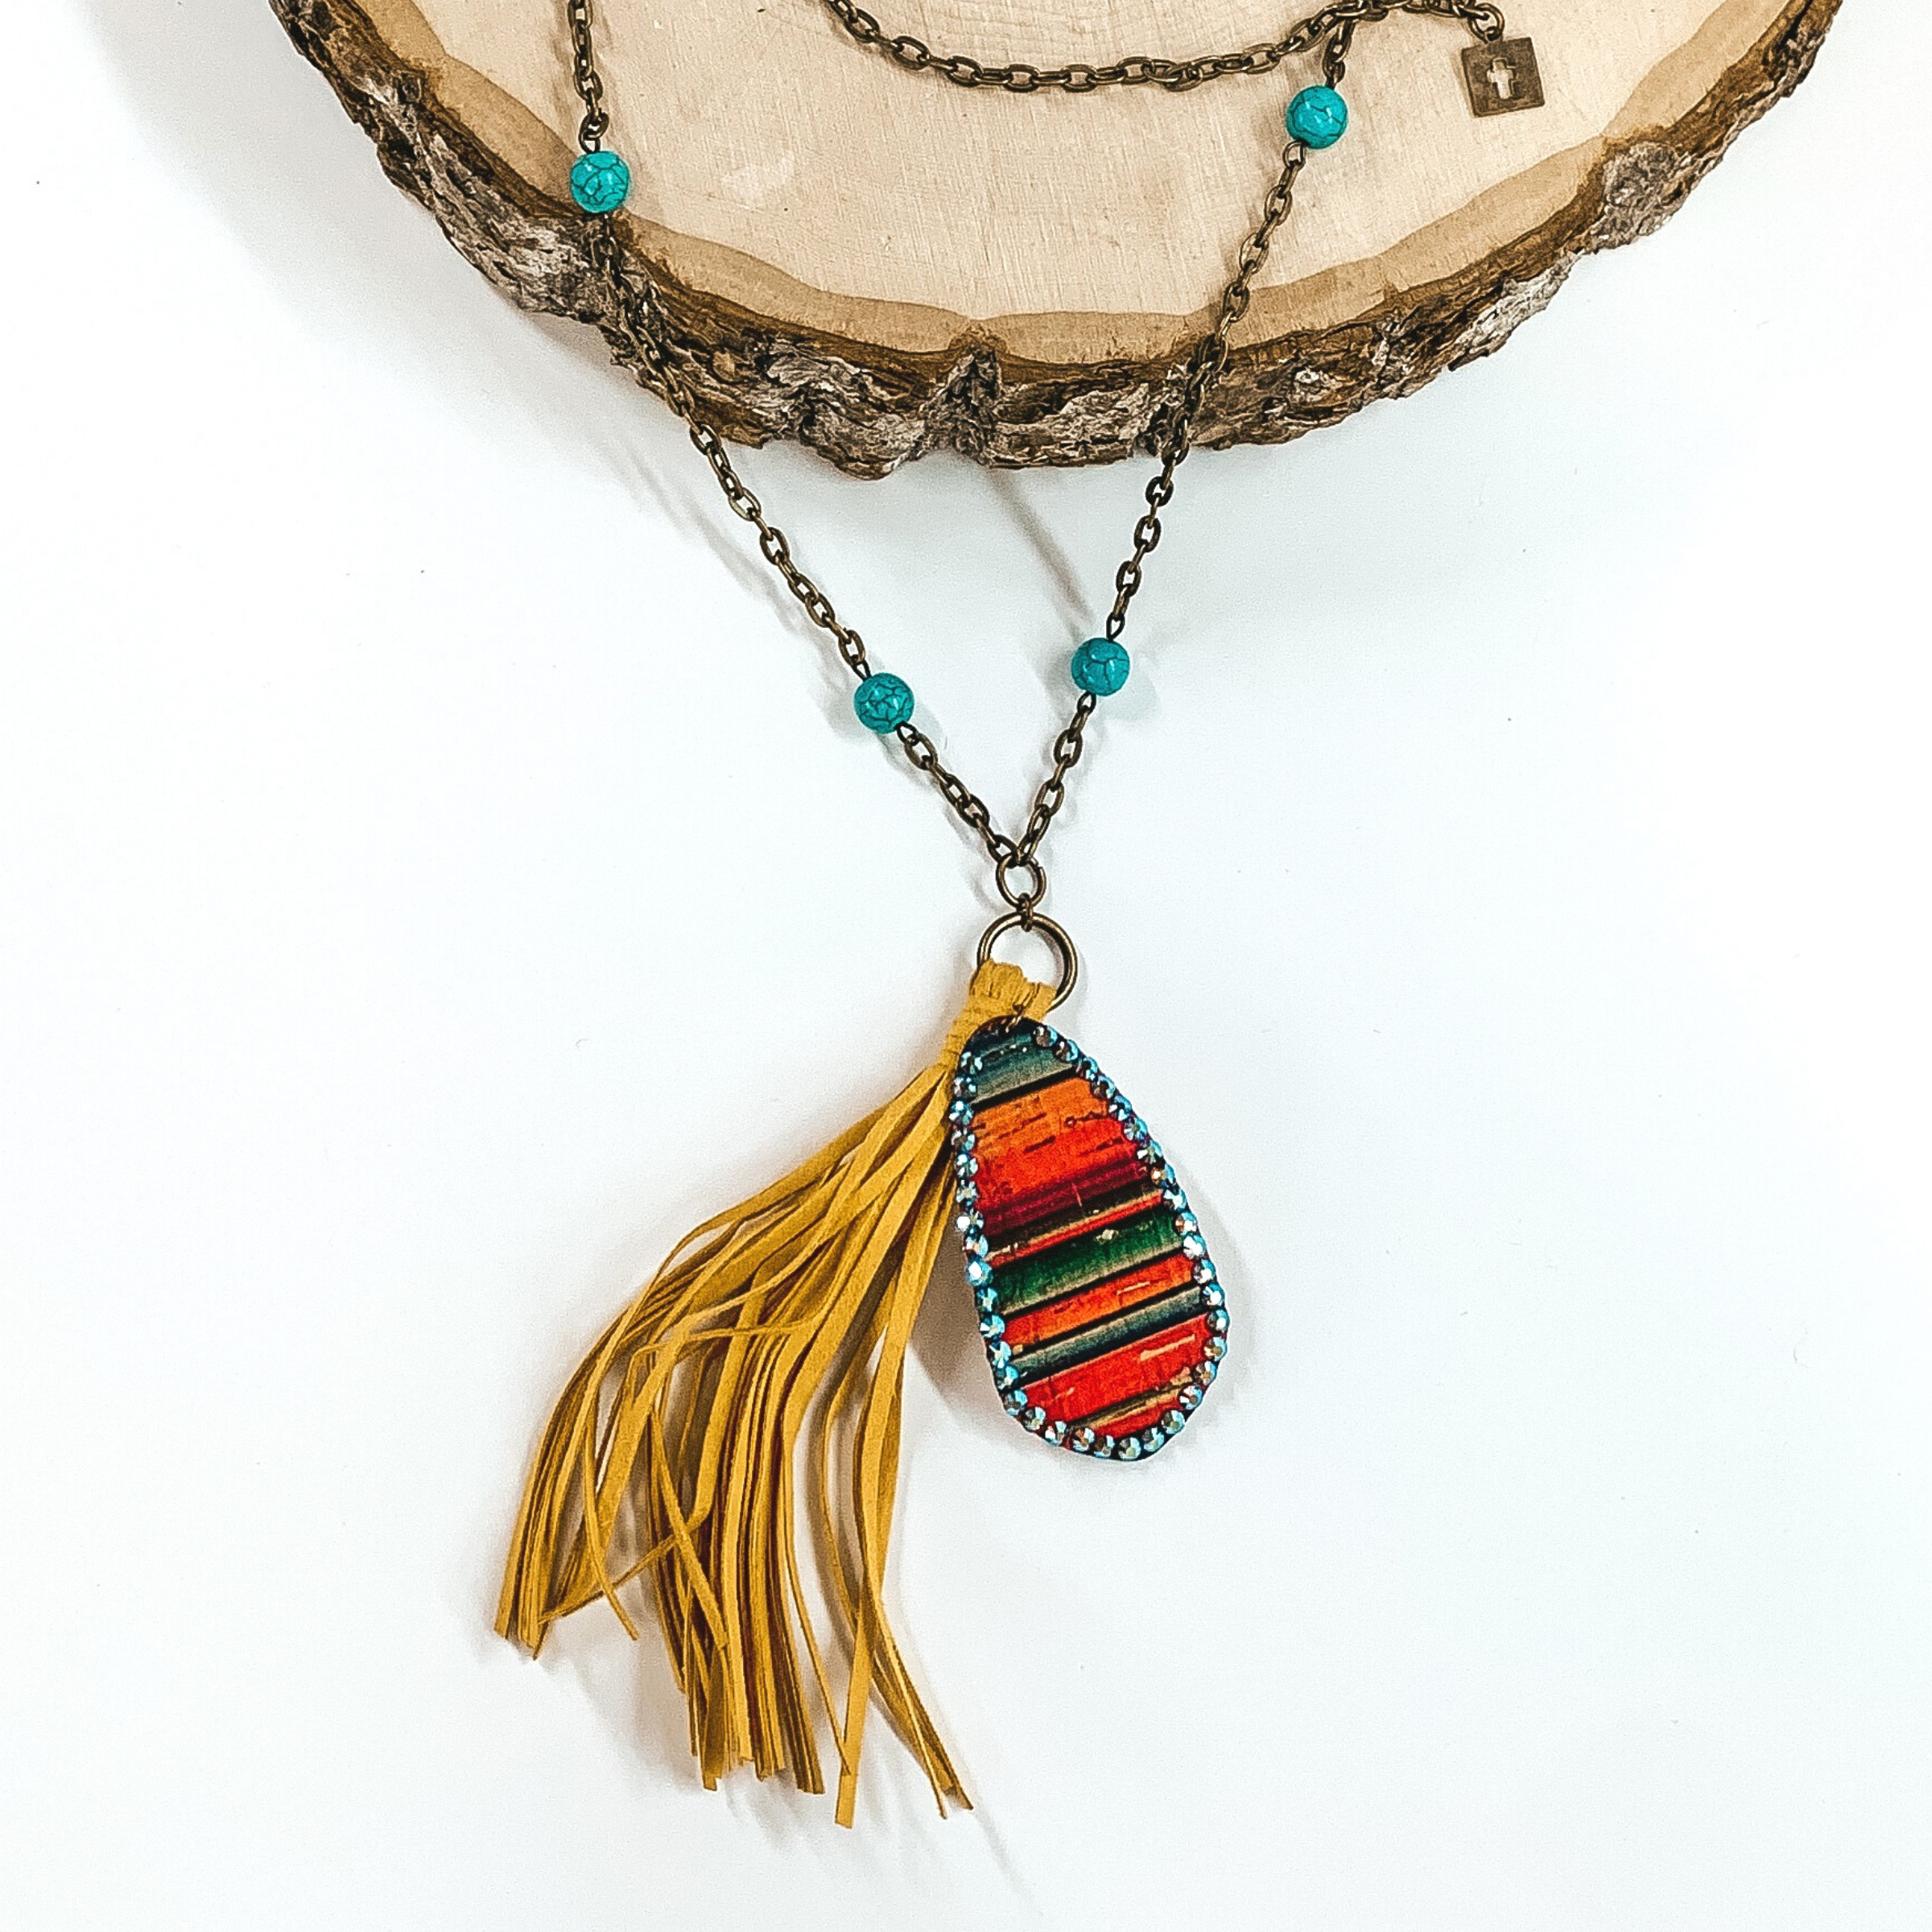 Long bronze chained necklace with turquoise bead spacer. At the bottom of the necklace there is a yellow tassel with an oval serape charm that has a crystal outline. This necklace is partially laying on a piece of wood on a white background. 